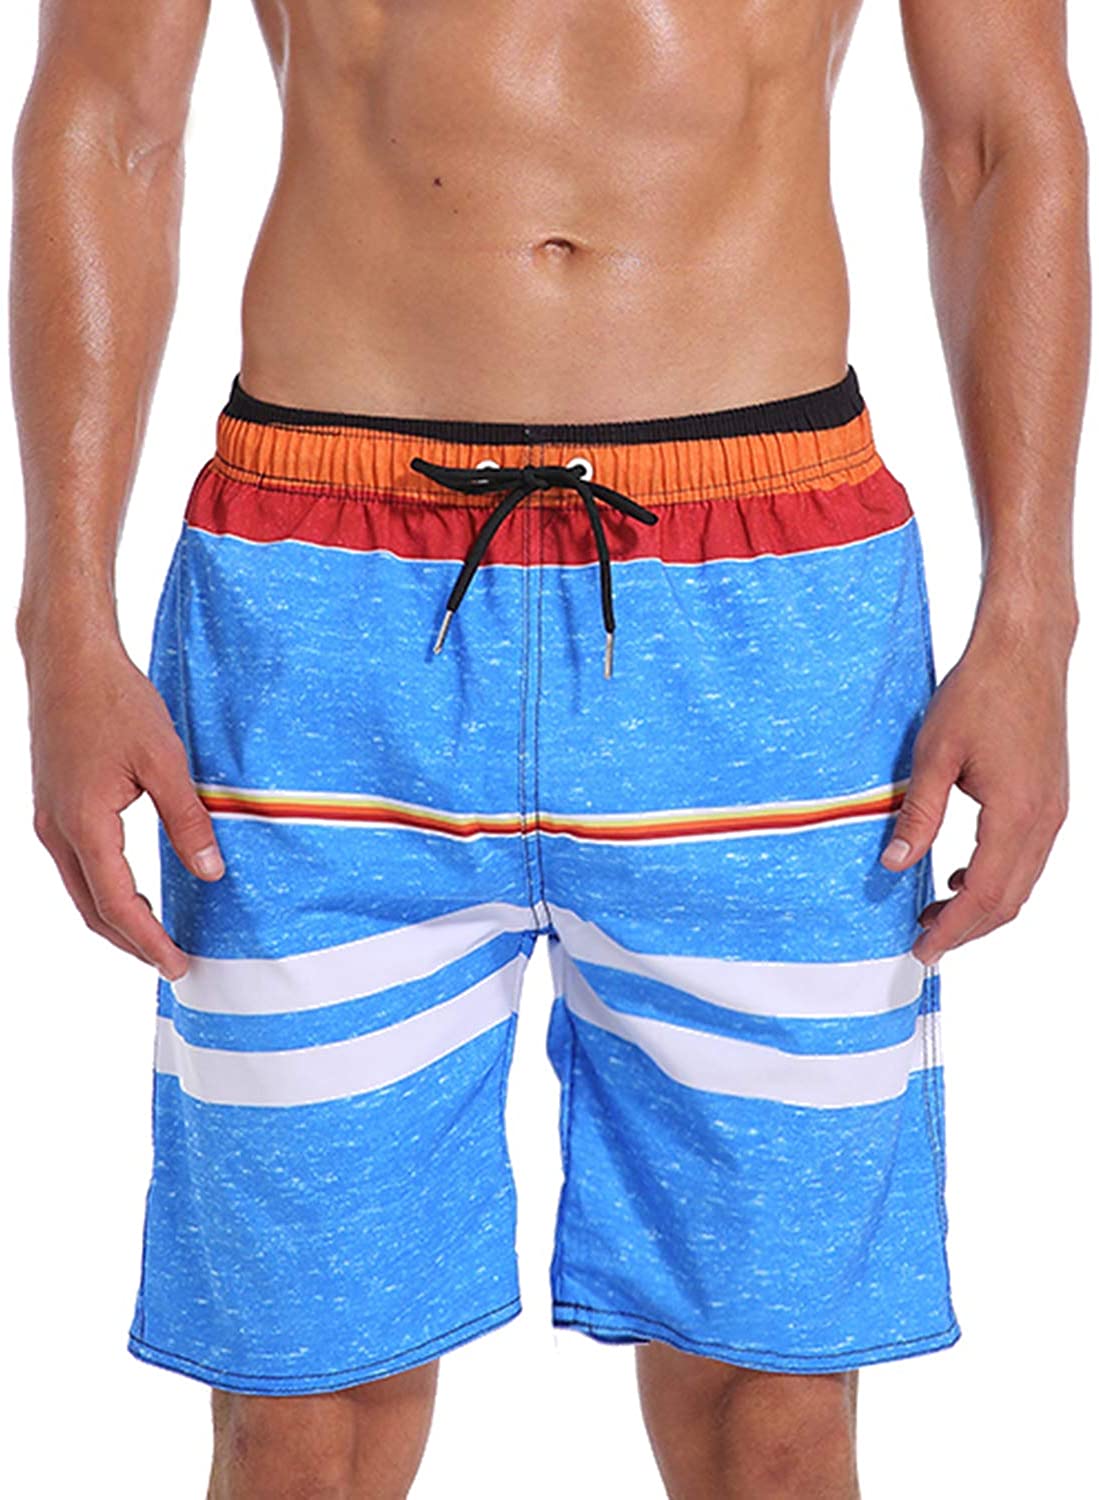 QRANSS Men's Quick Dry Swim Trunks Bathing Suit Striped Shorts with Pockets